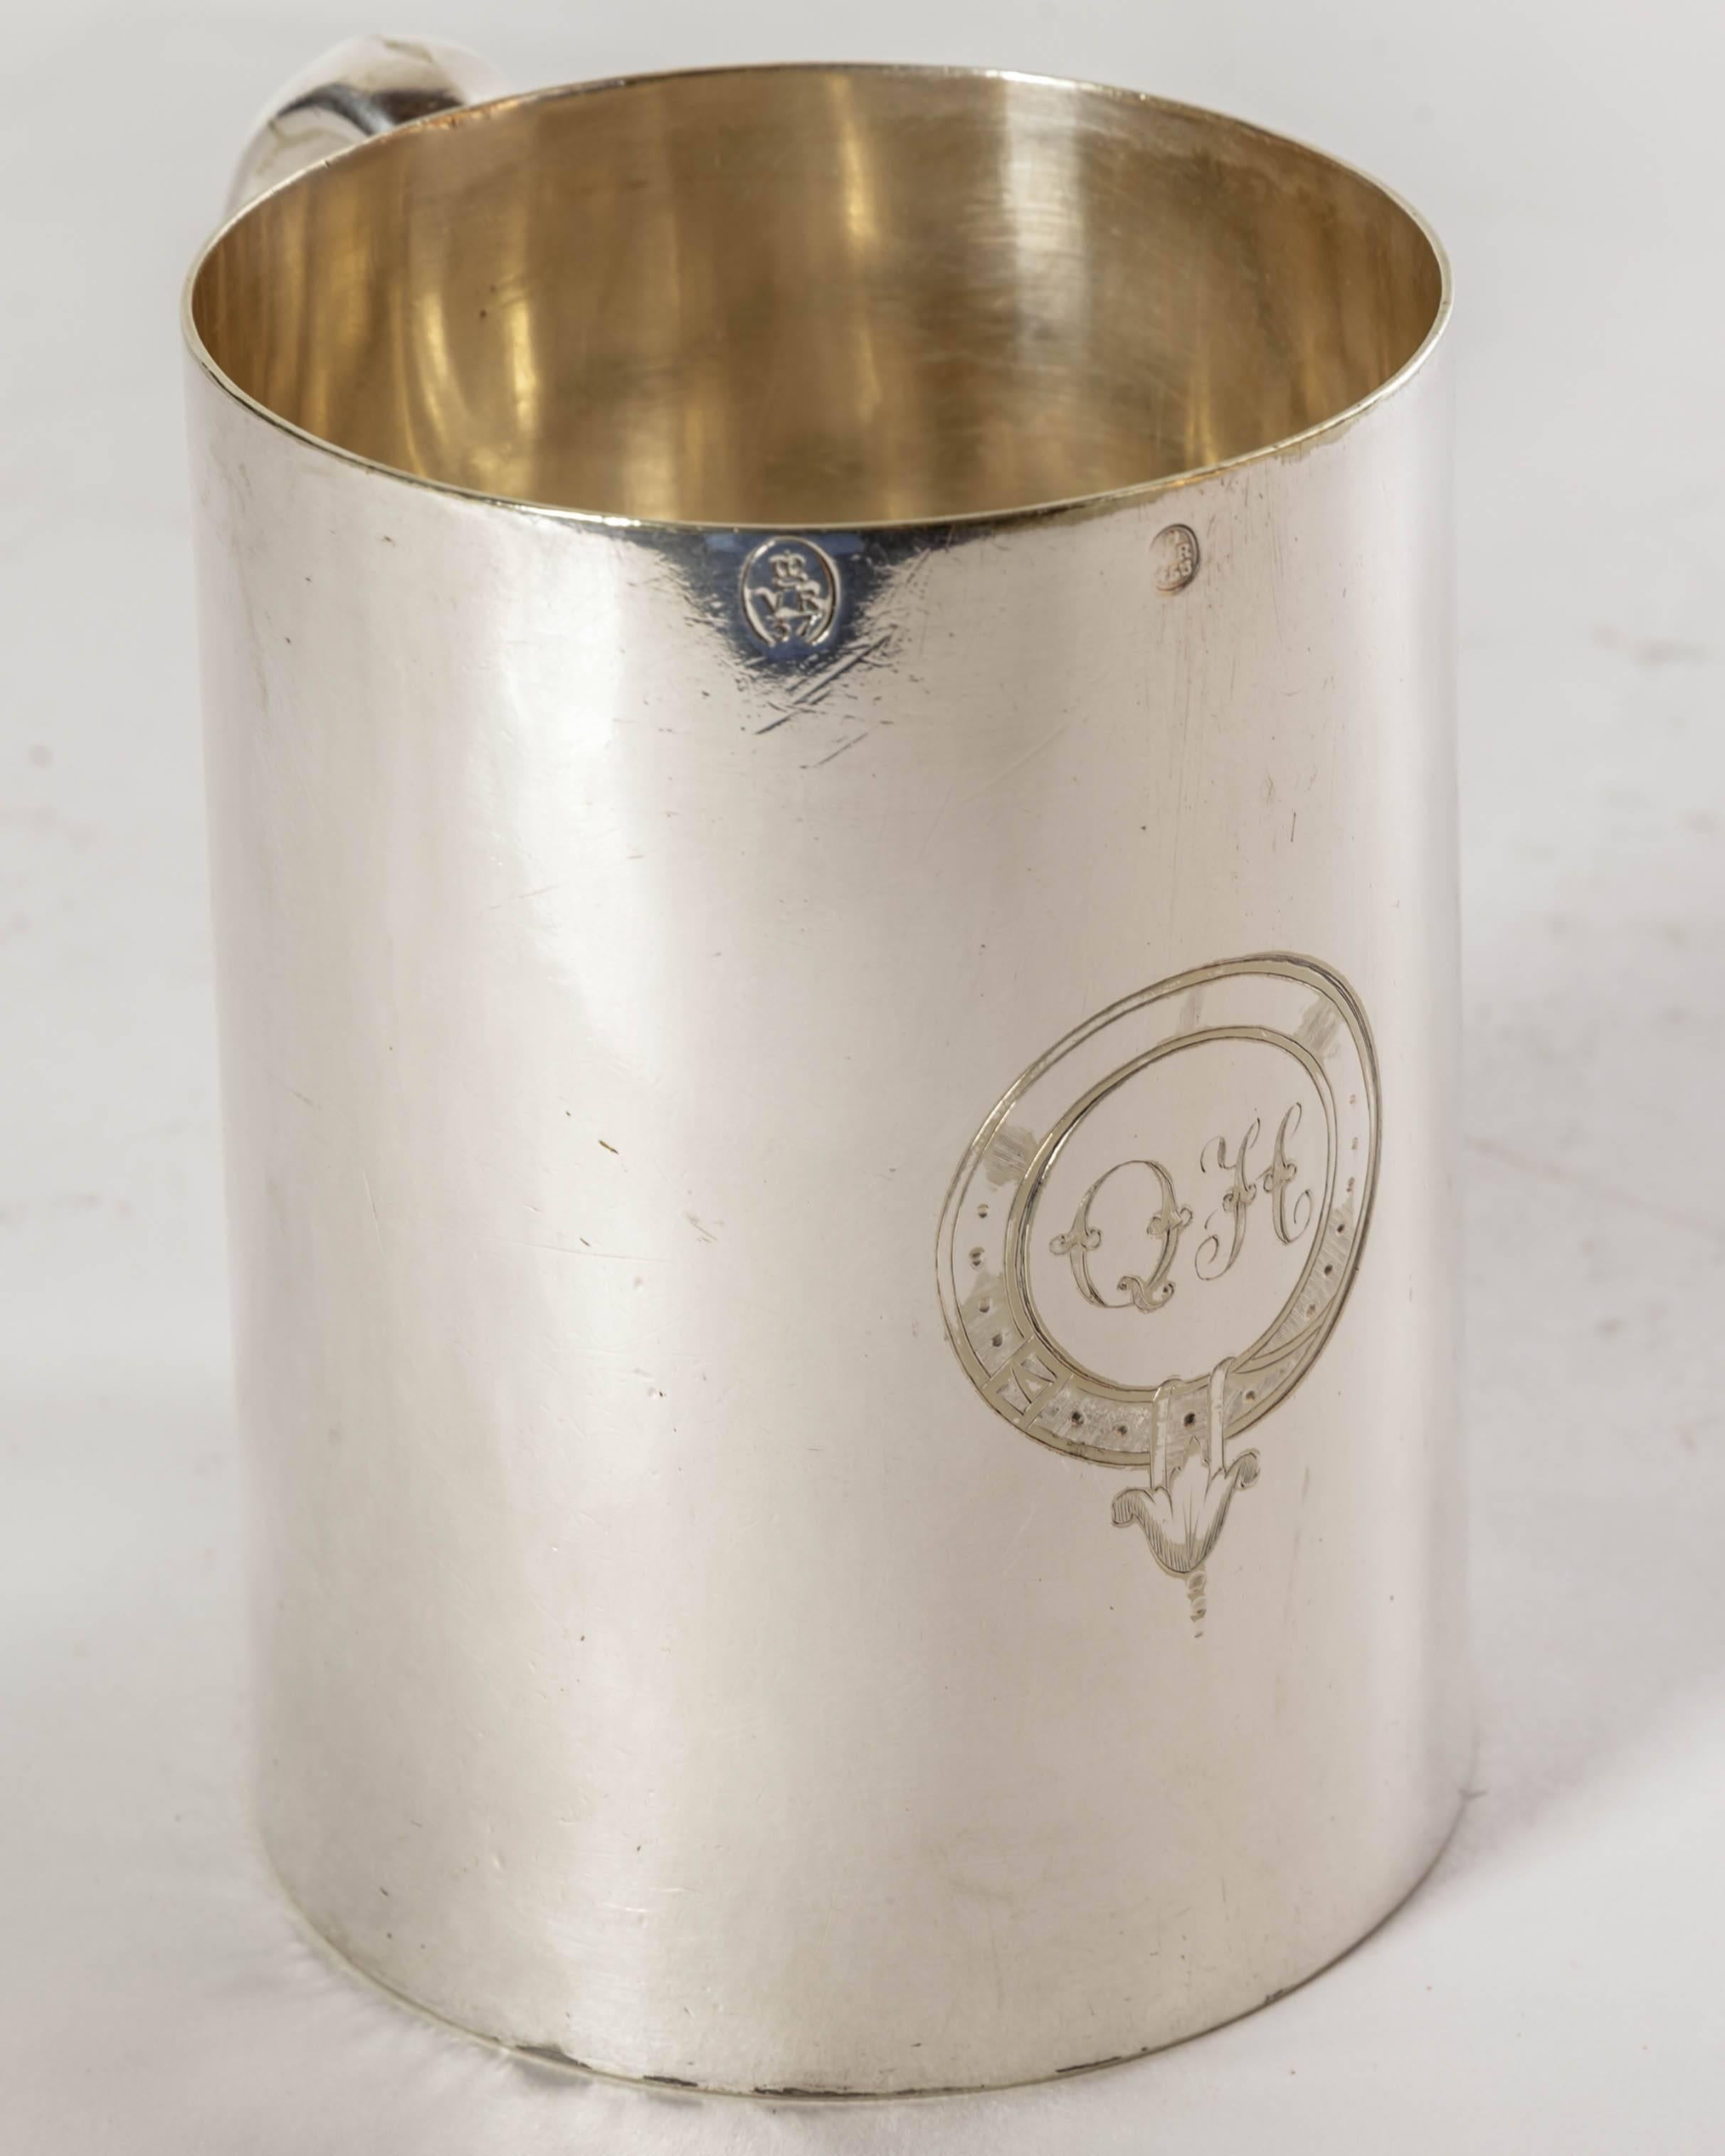 English Victorian silver plate tankard with decorative engraved belted cartouche having the initials Q H. The tankard is a plain simple design on which are three imprints with VR (For Victoria Rex - Queen) two with crowns and pint. Bottom is